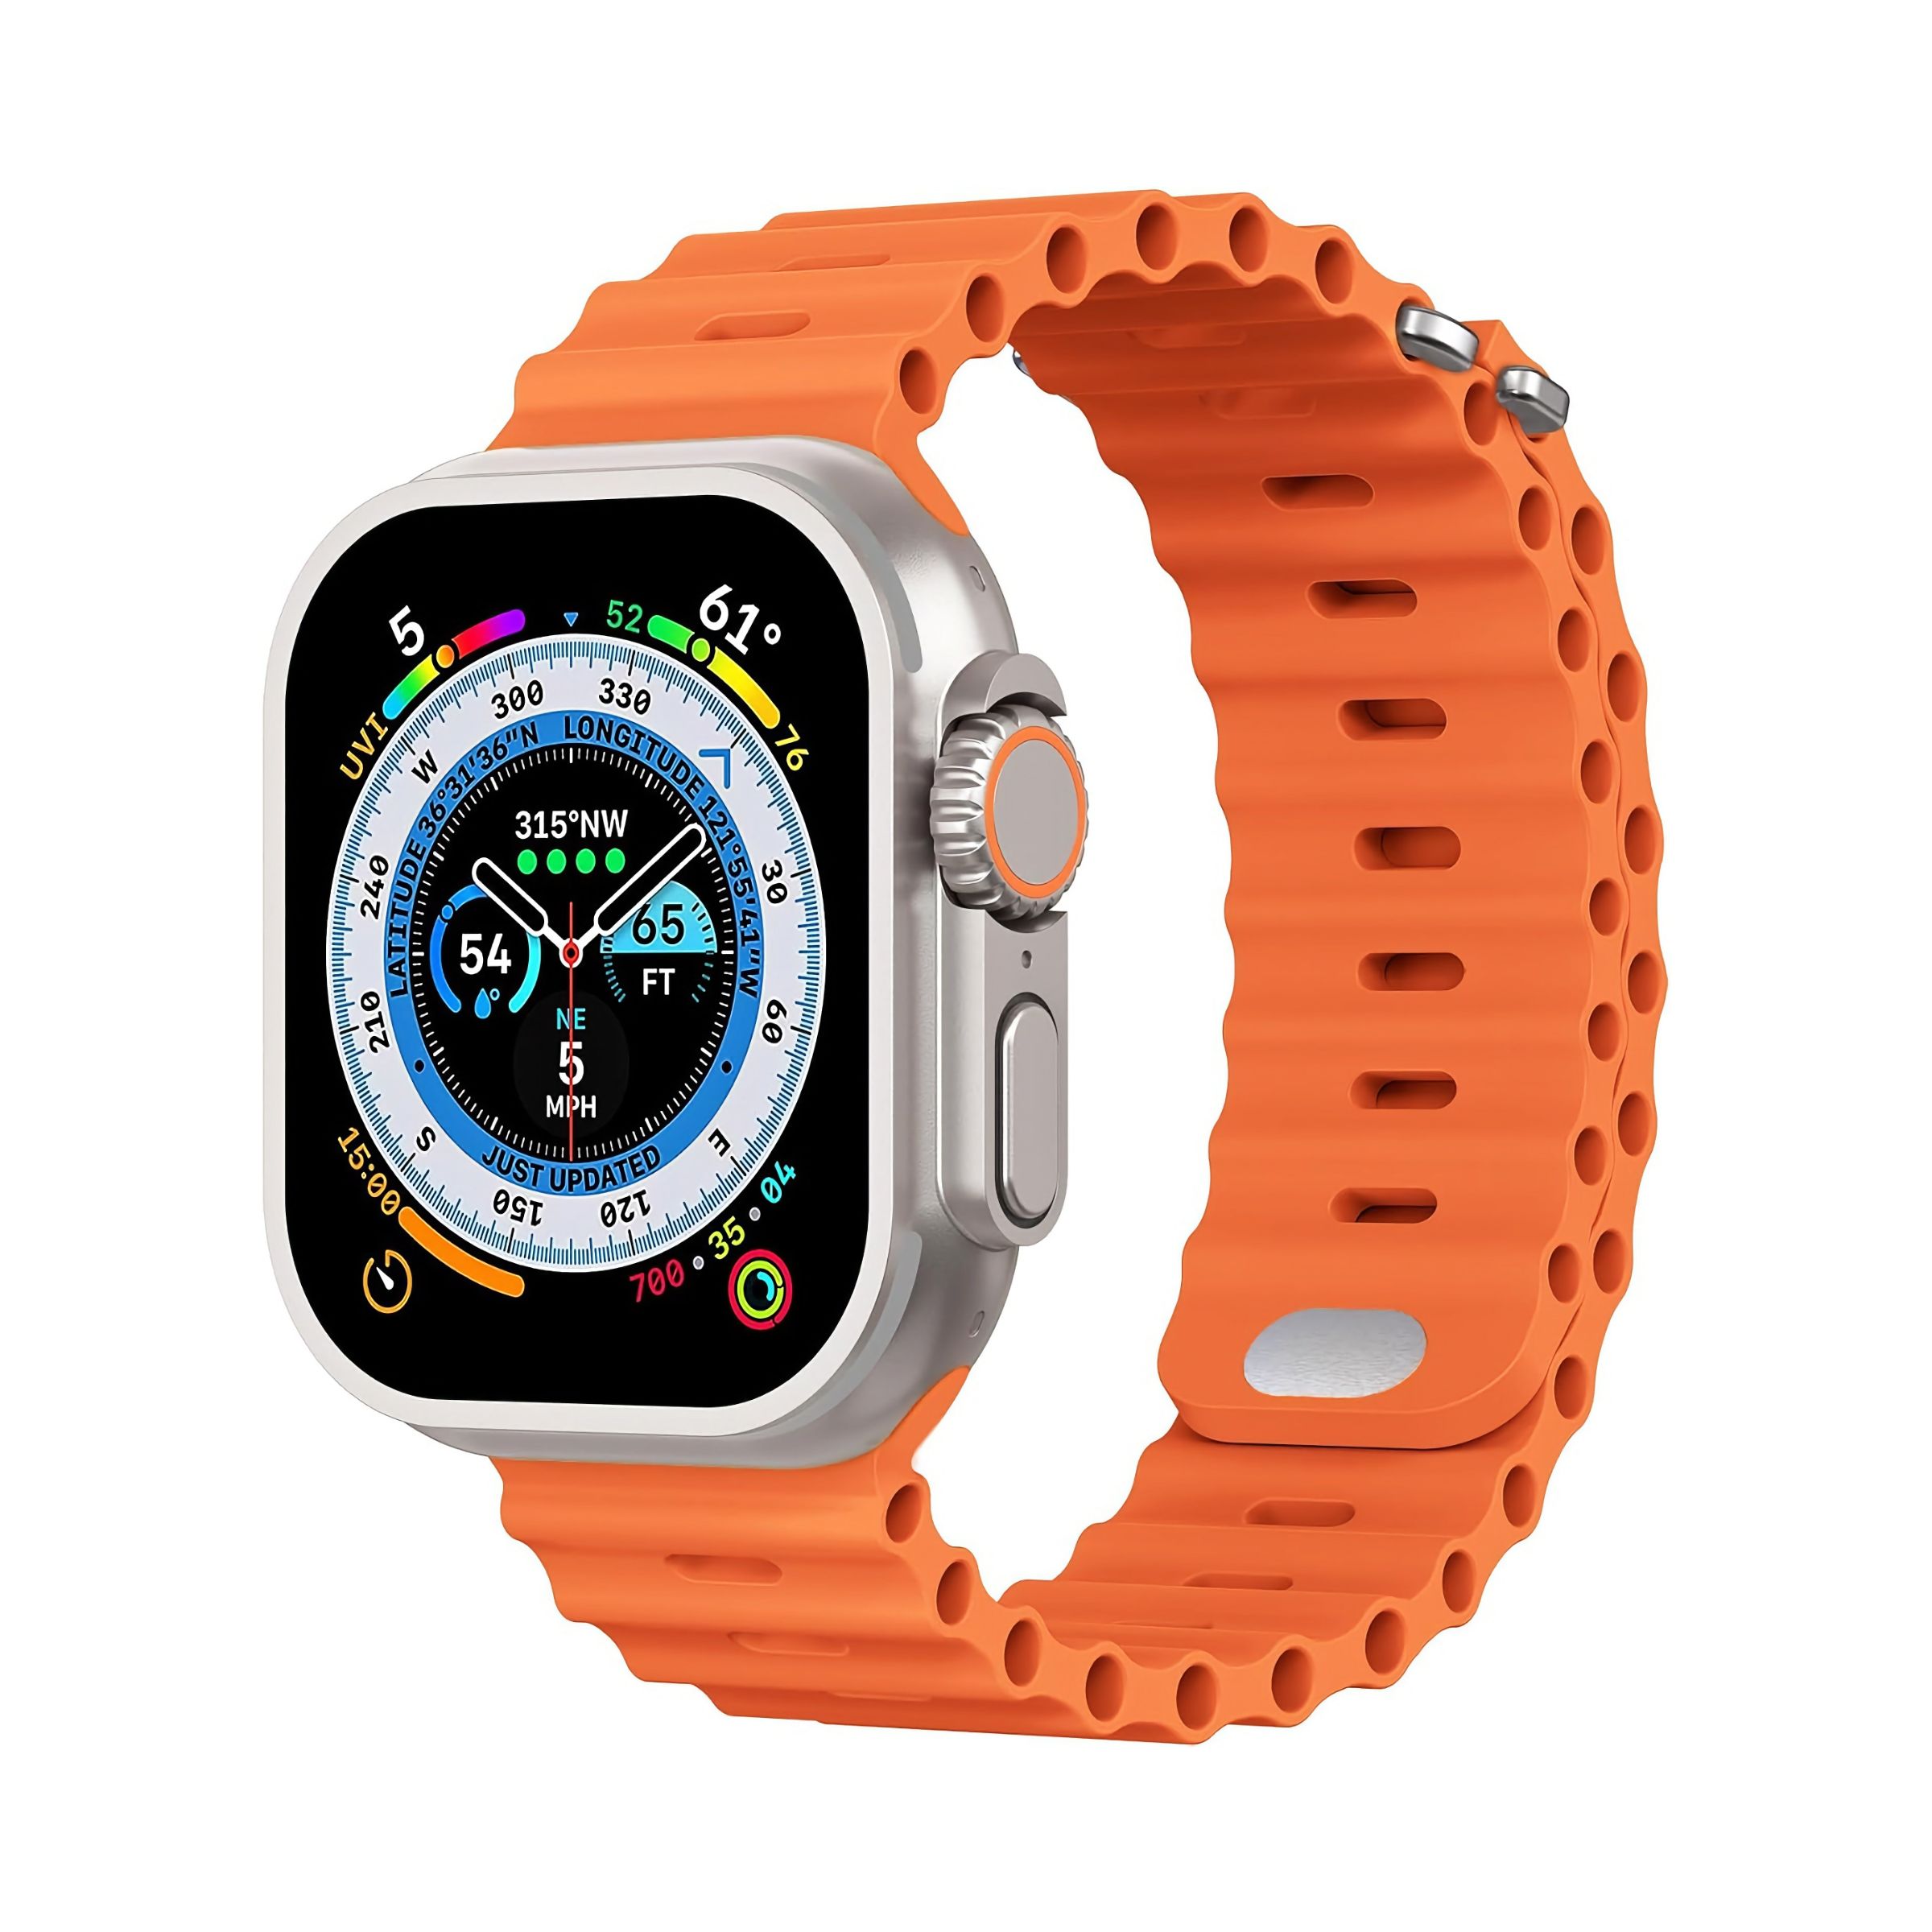 An Apple Watch Ultra with ridged, rubber band with a clasp.